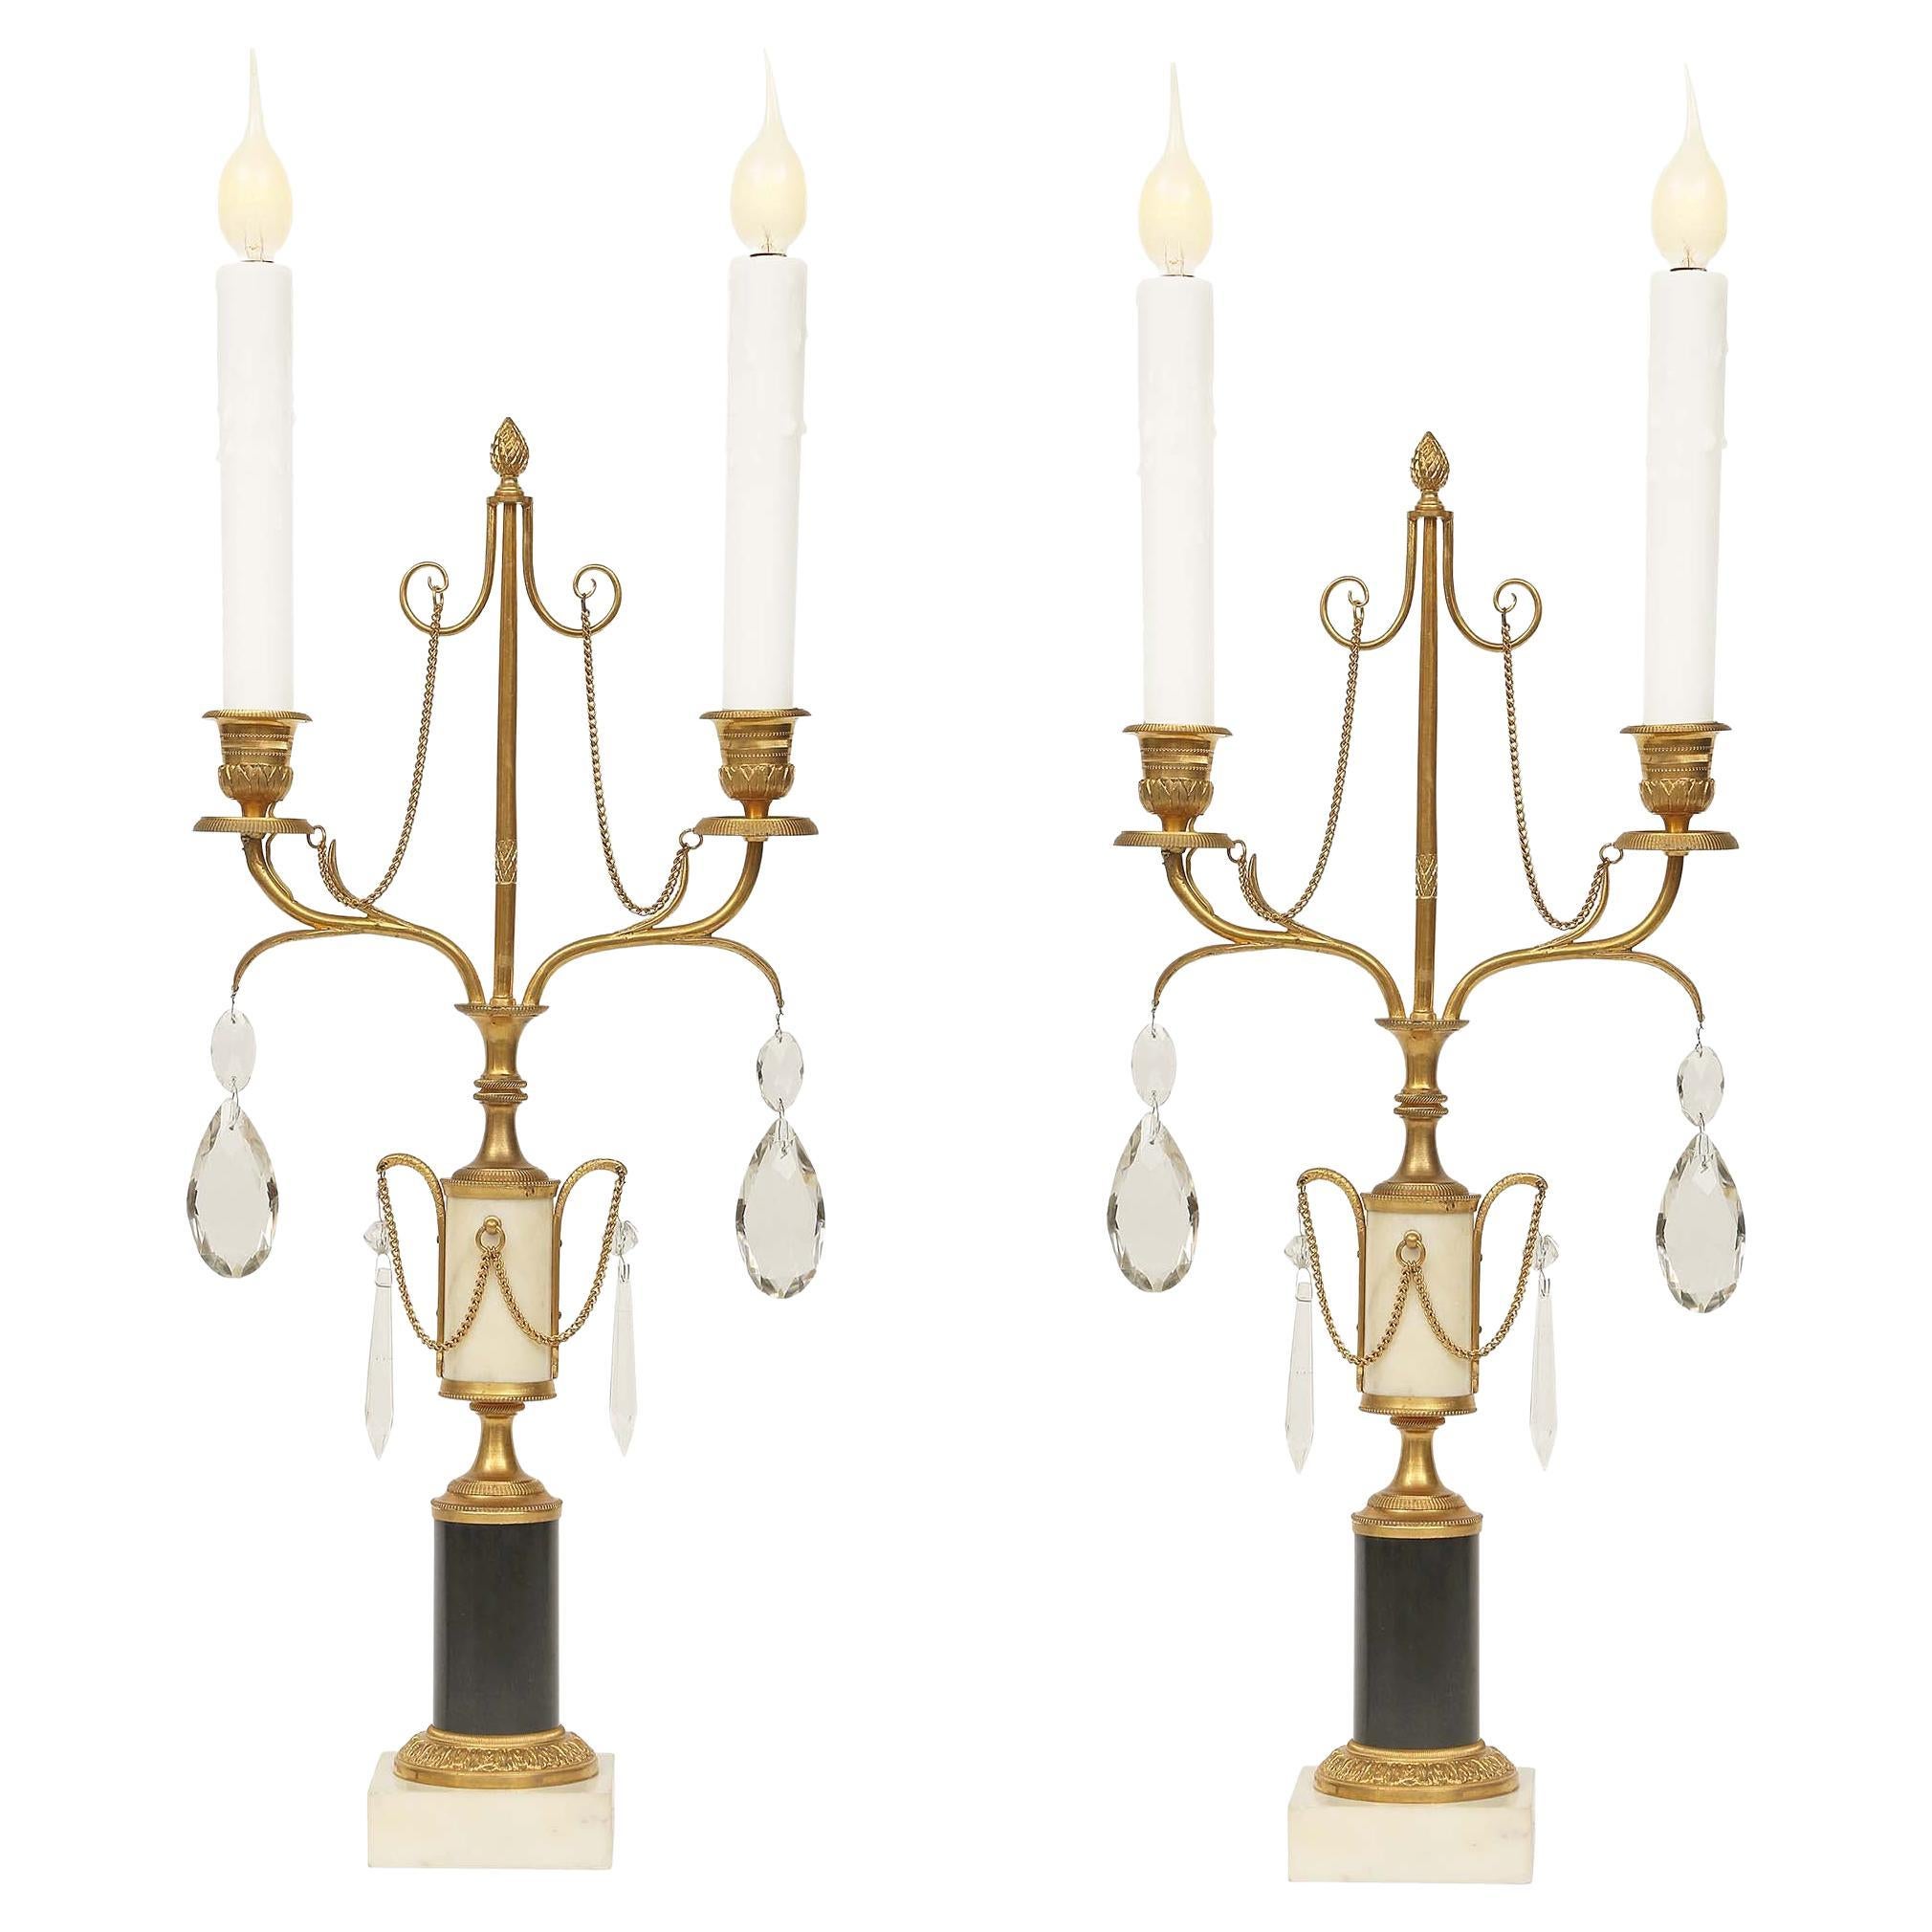 Pair of French Early 19th Century Louis XVI St Candelabras